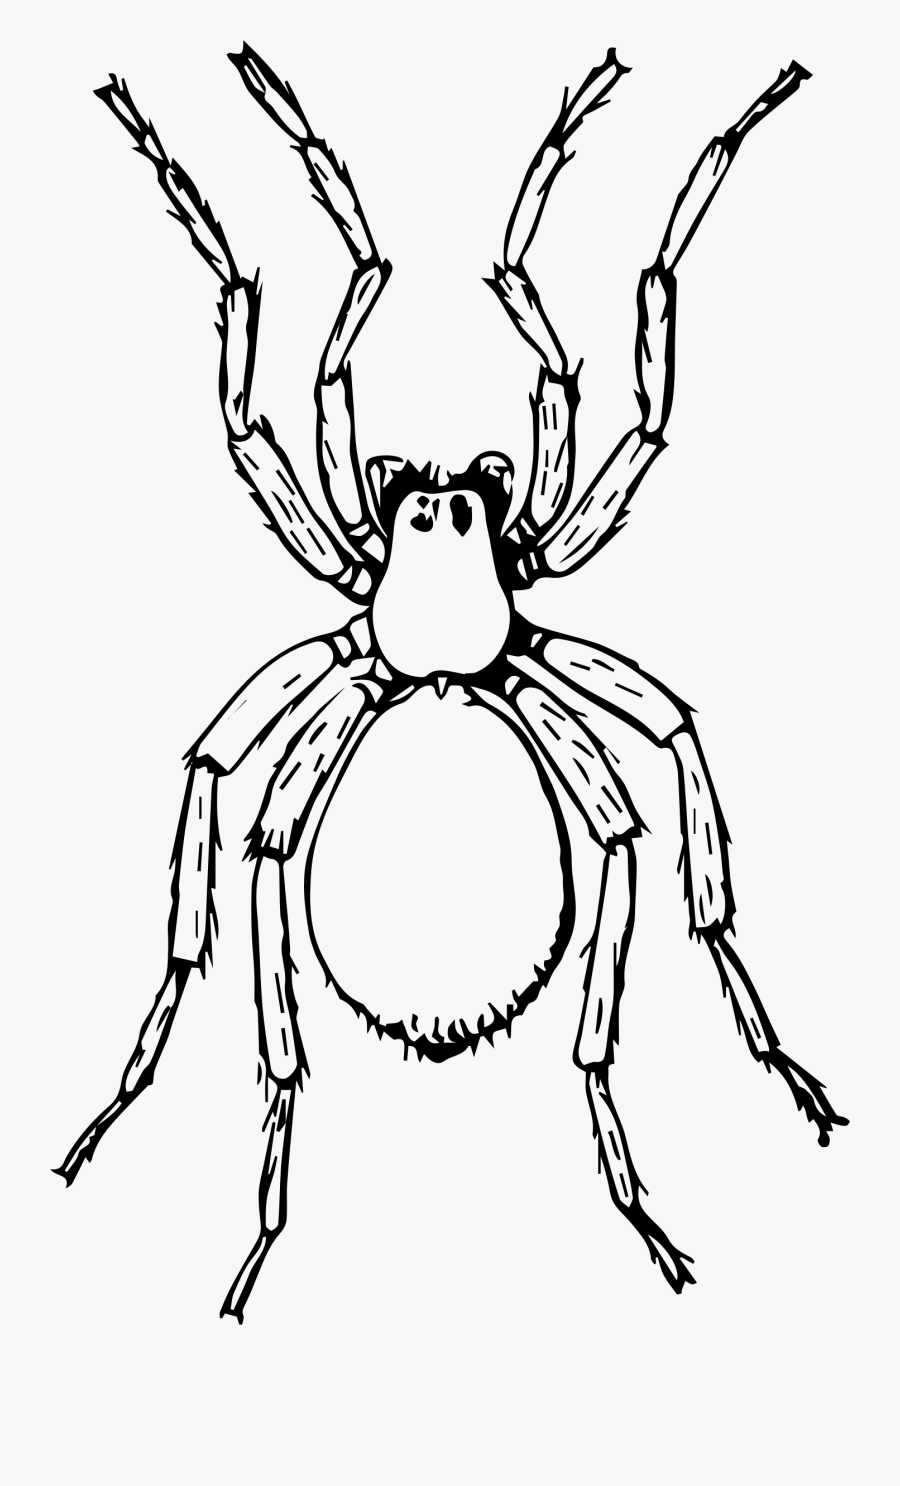 Big Image Png - Spider Black And White Png, Transparent Clipart